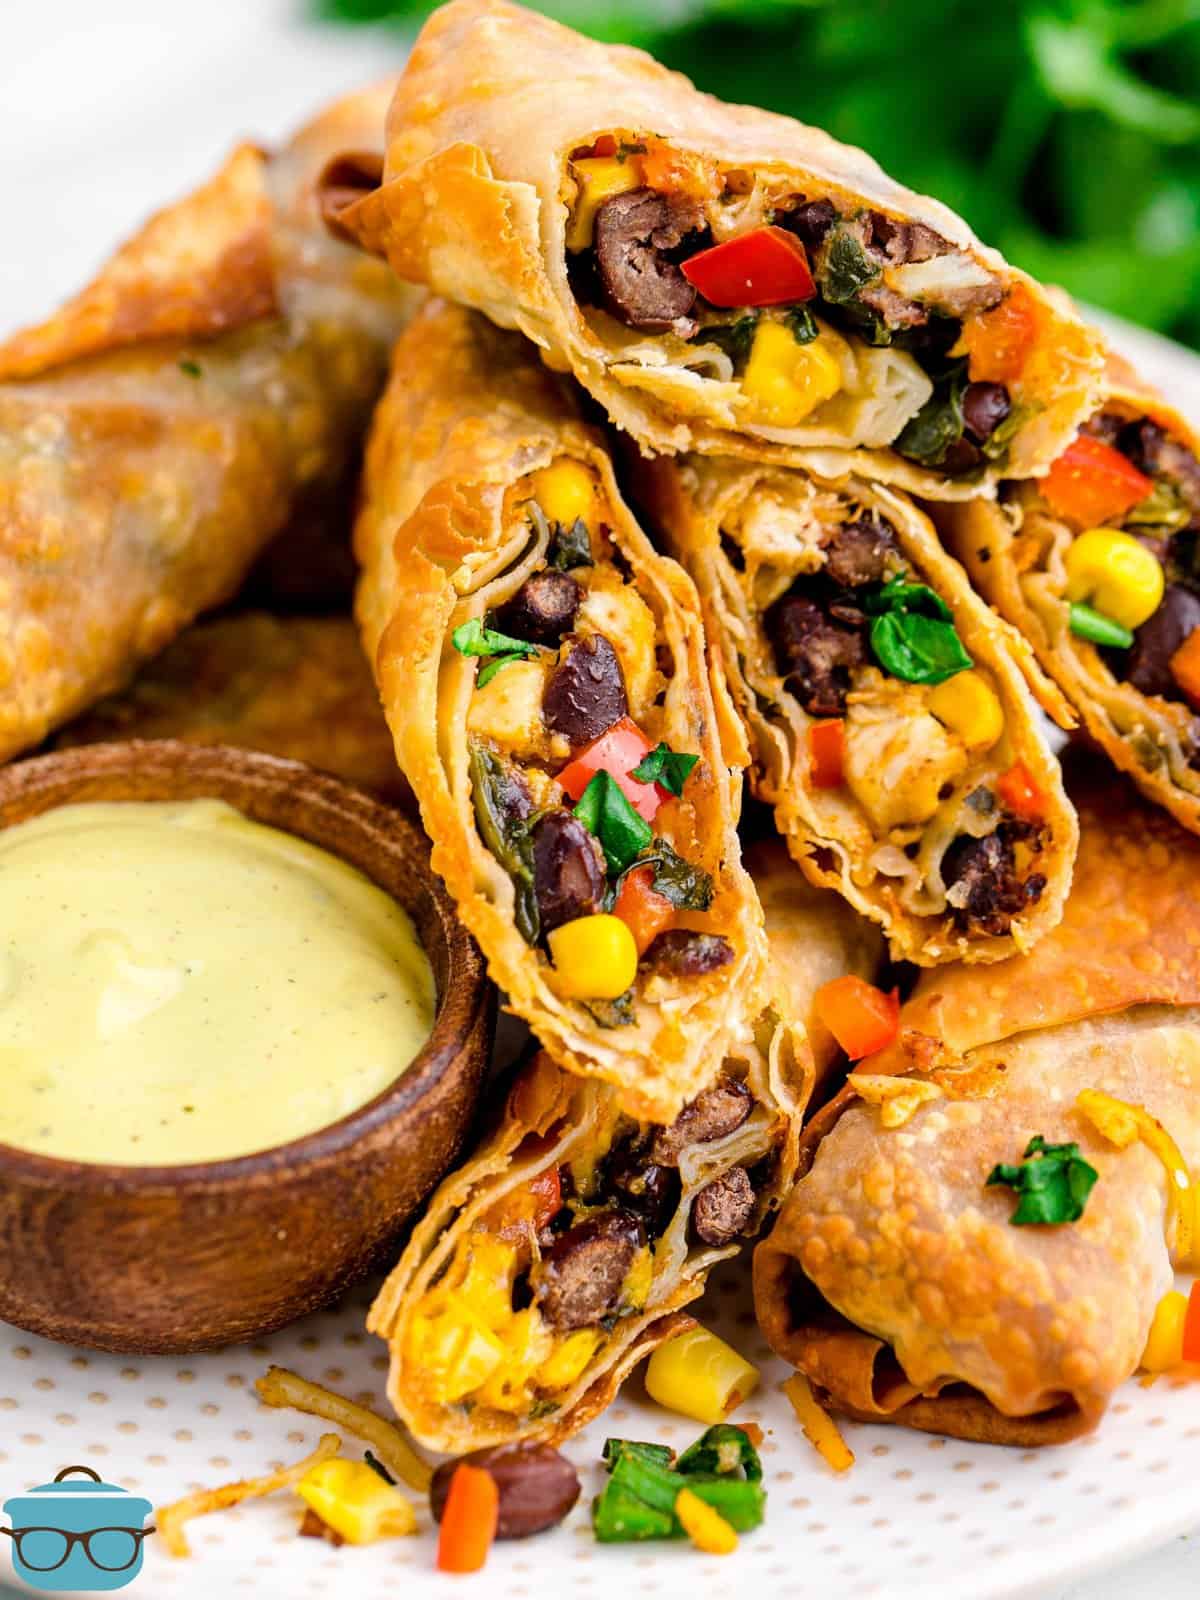 Looking at a few egg rolls with southwestern filling coming out.